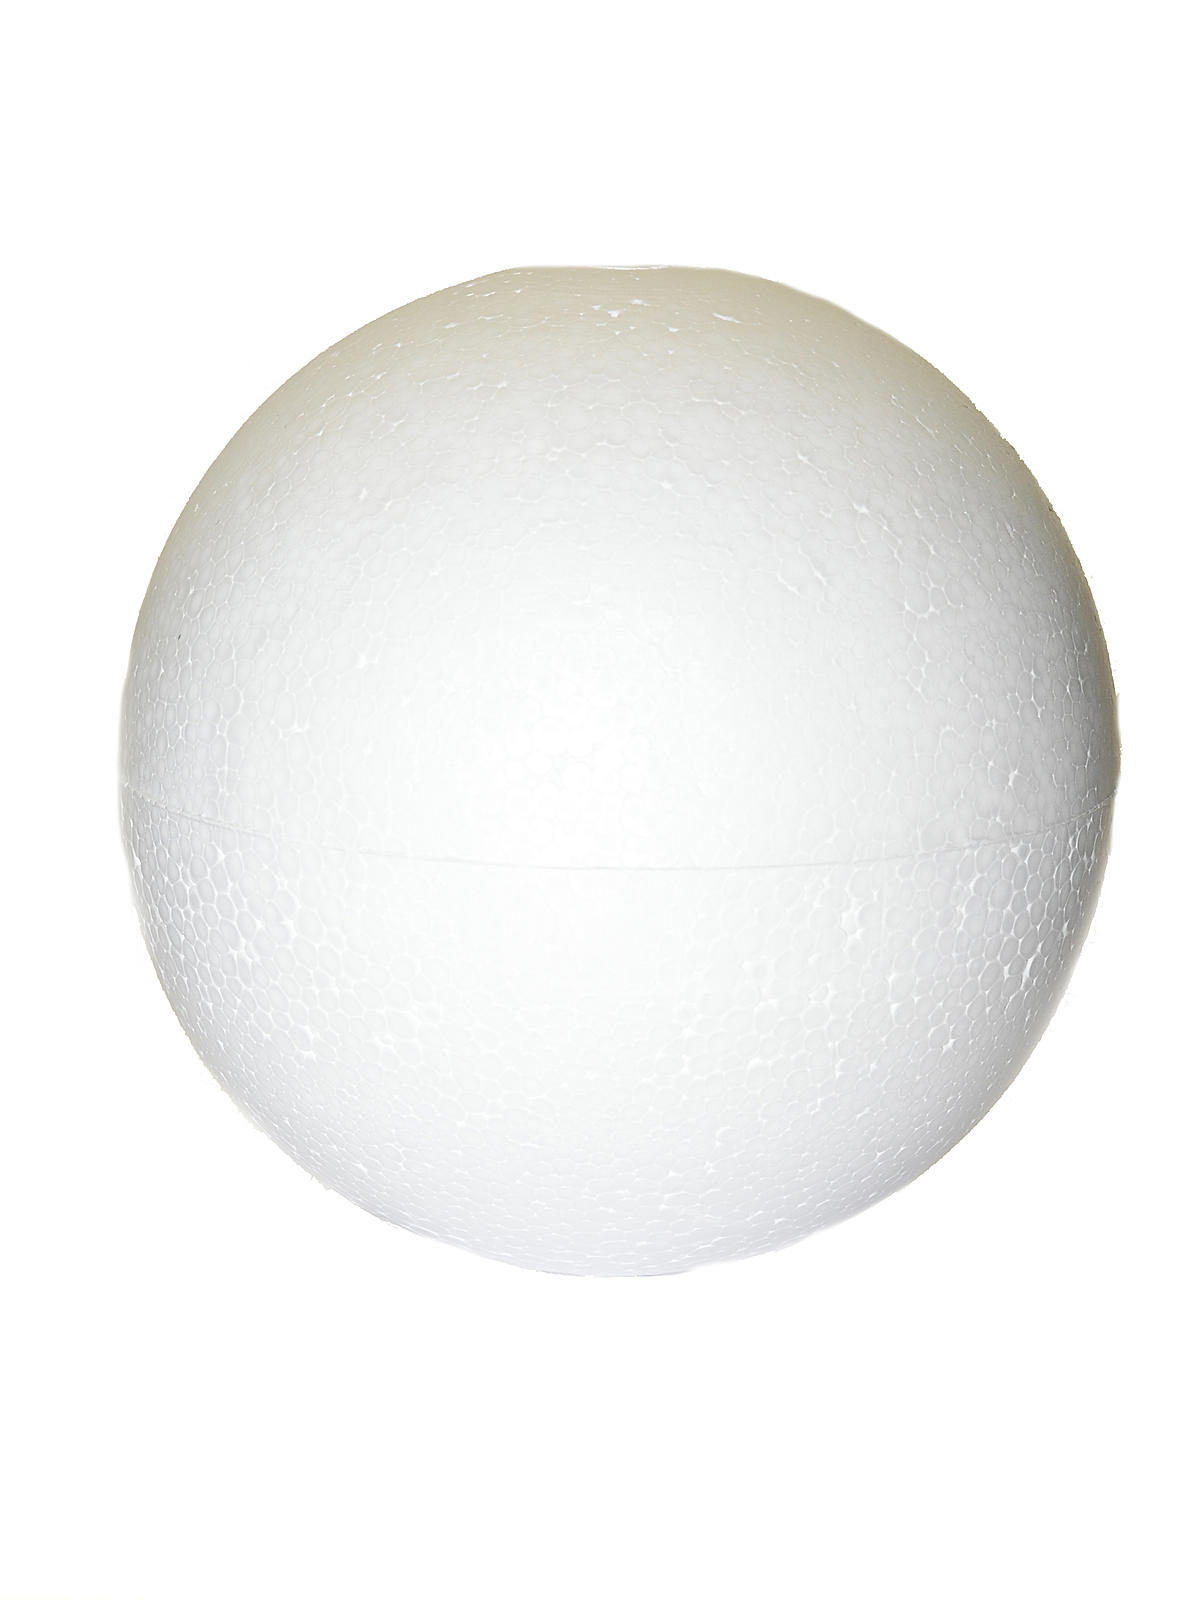 Craft Foam Shapes Ball 4 In. Pack Of 2